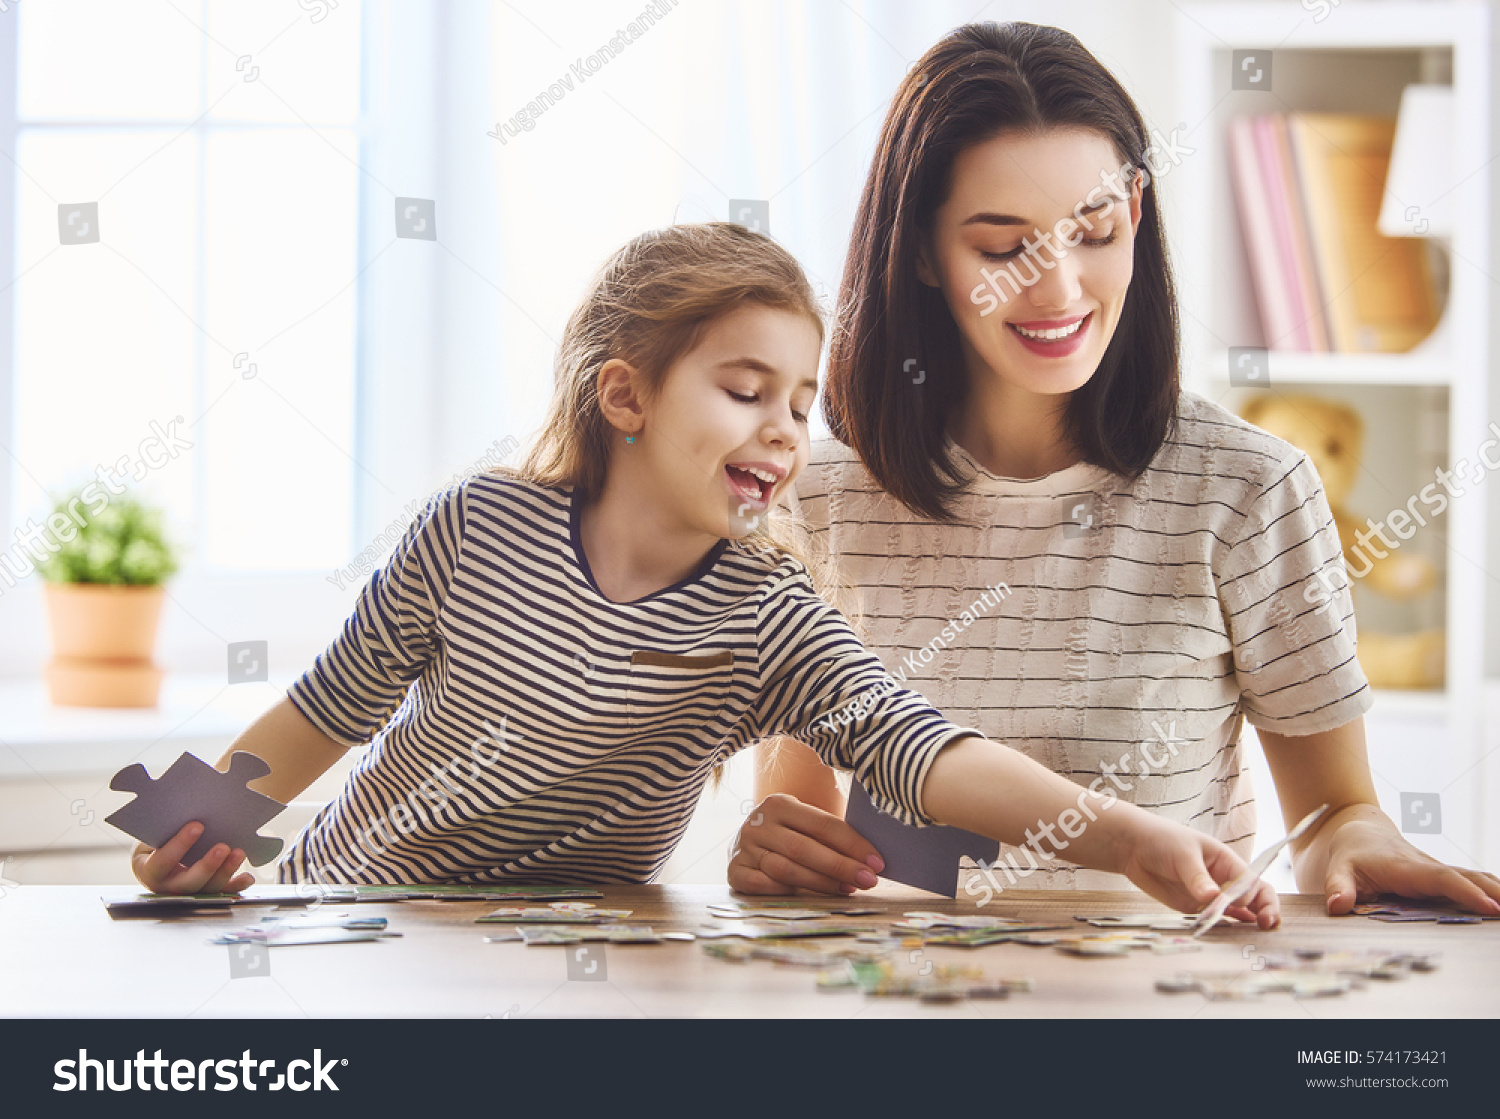 Happy family. Mother and daughter do puzzles together. Adult woman teaches child to solve puzzles. #574173421